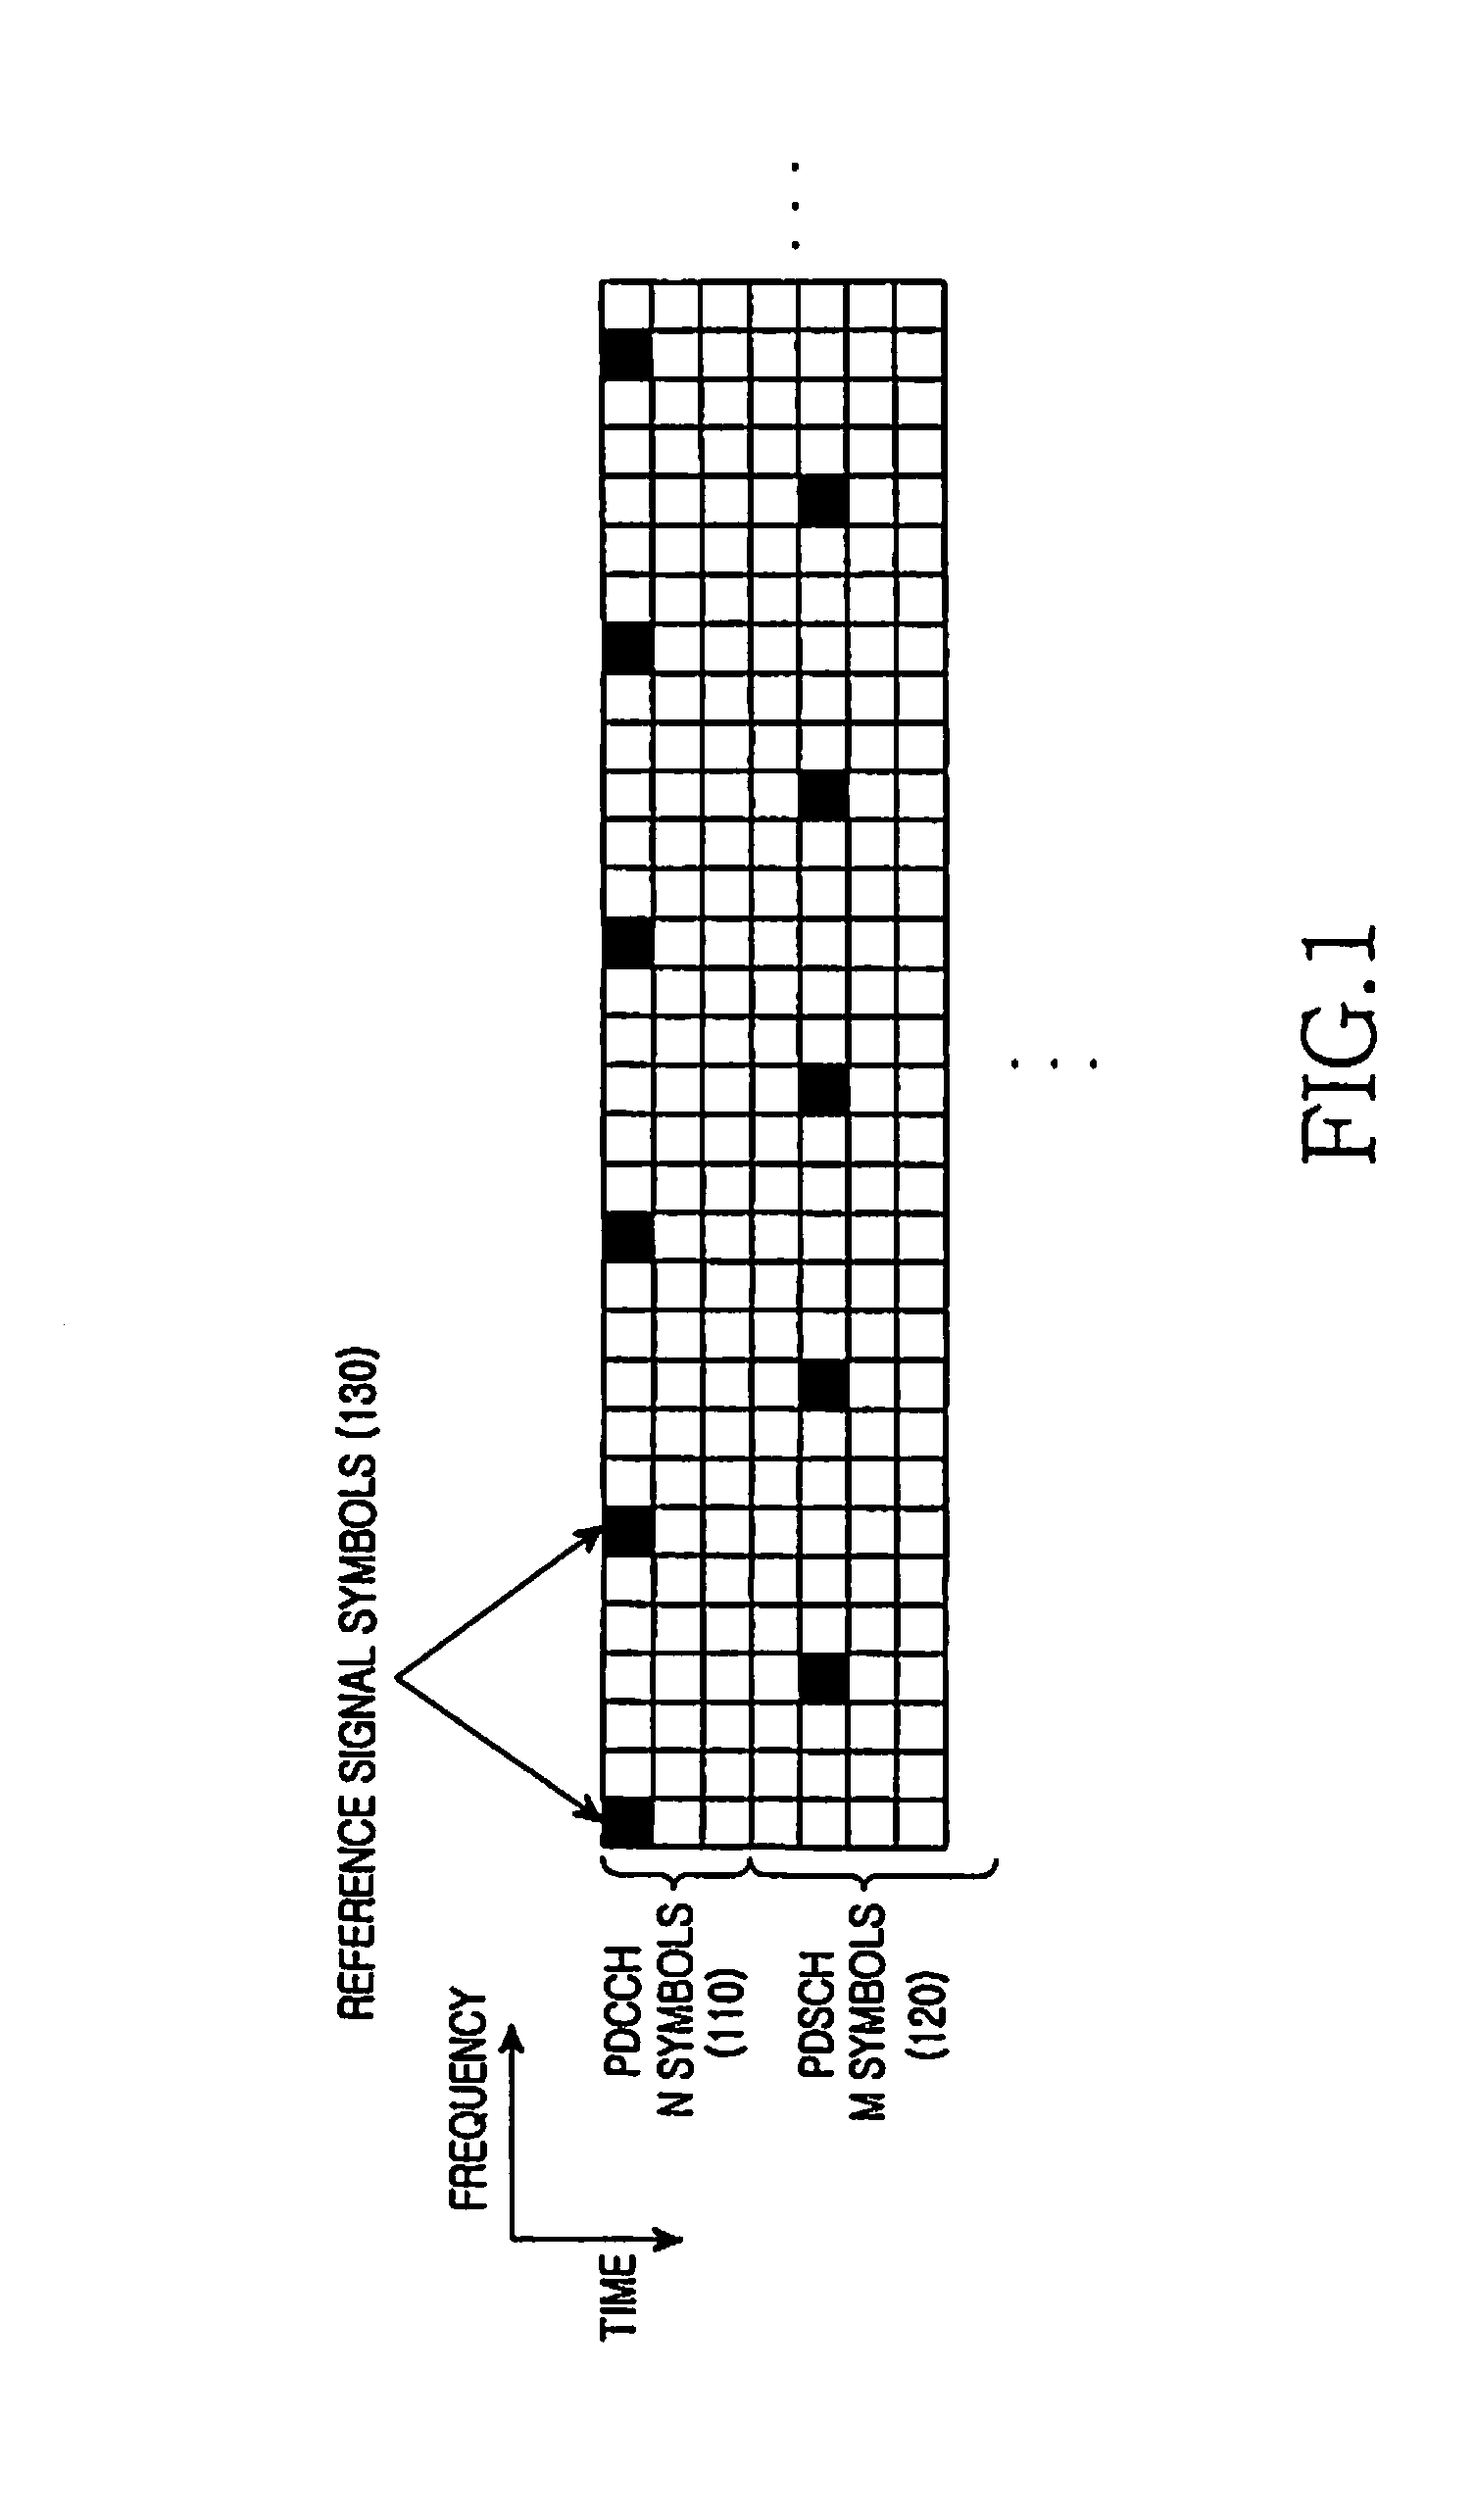 Method and system for dimensioning scheduling assignments in a communication system